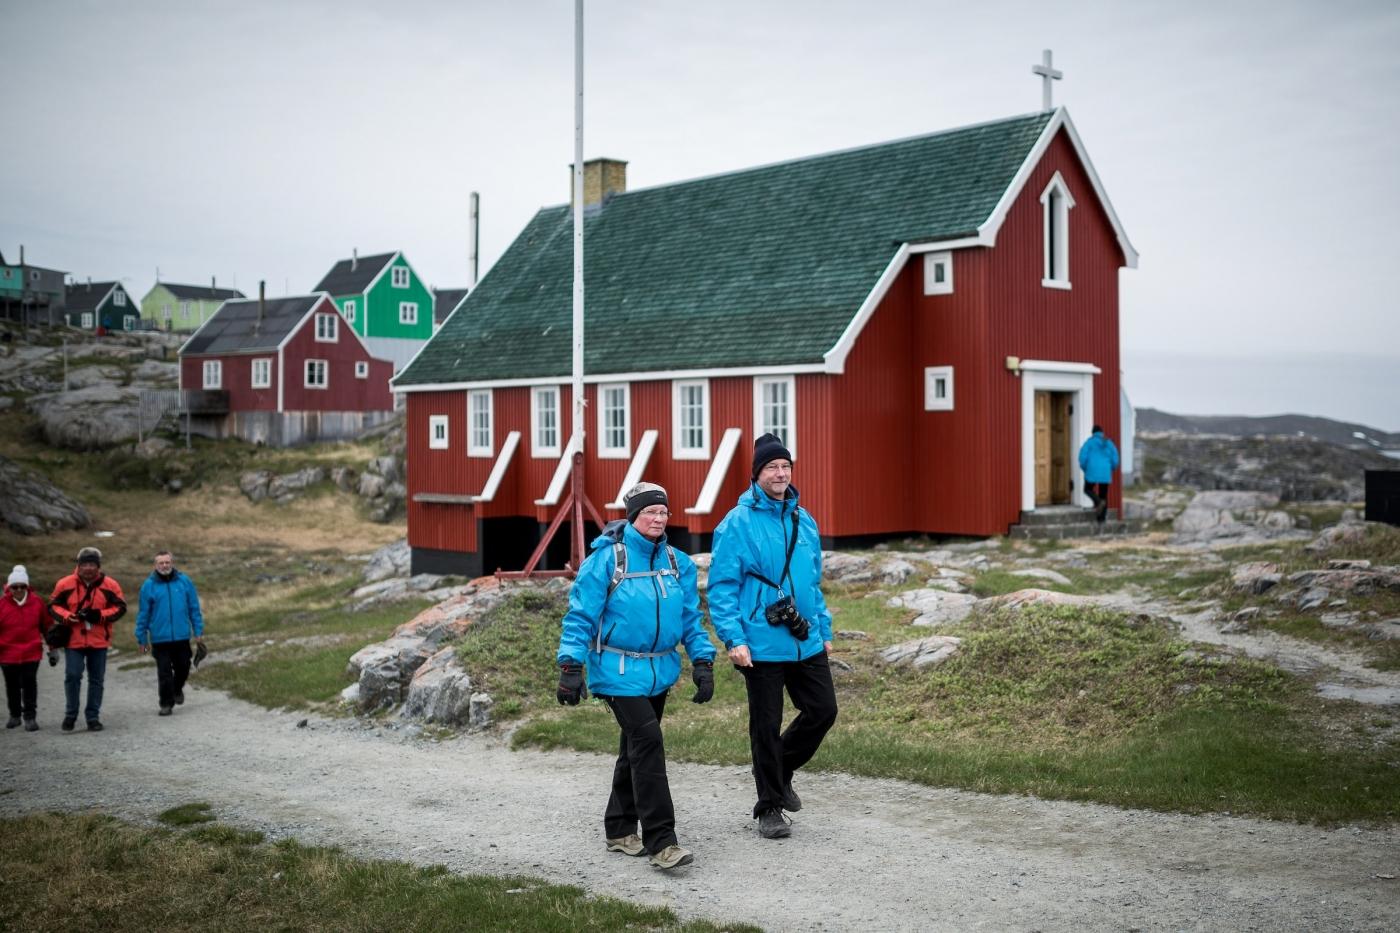 MS Fram cruise guests walking by the church in Itilleq in Greenland. Photo by Mads Pihl - Visit Greenland